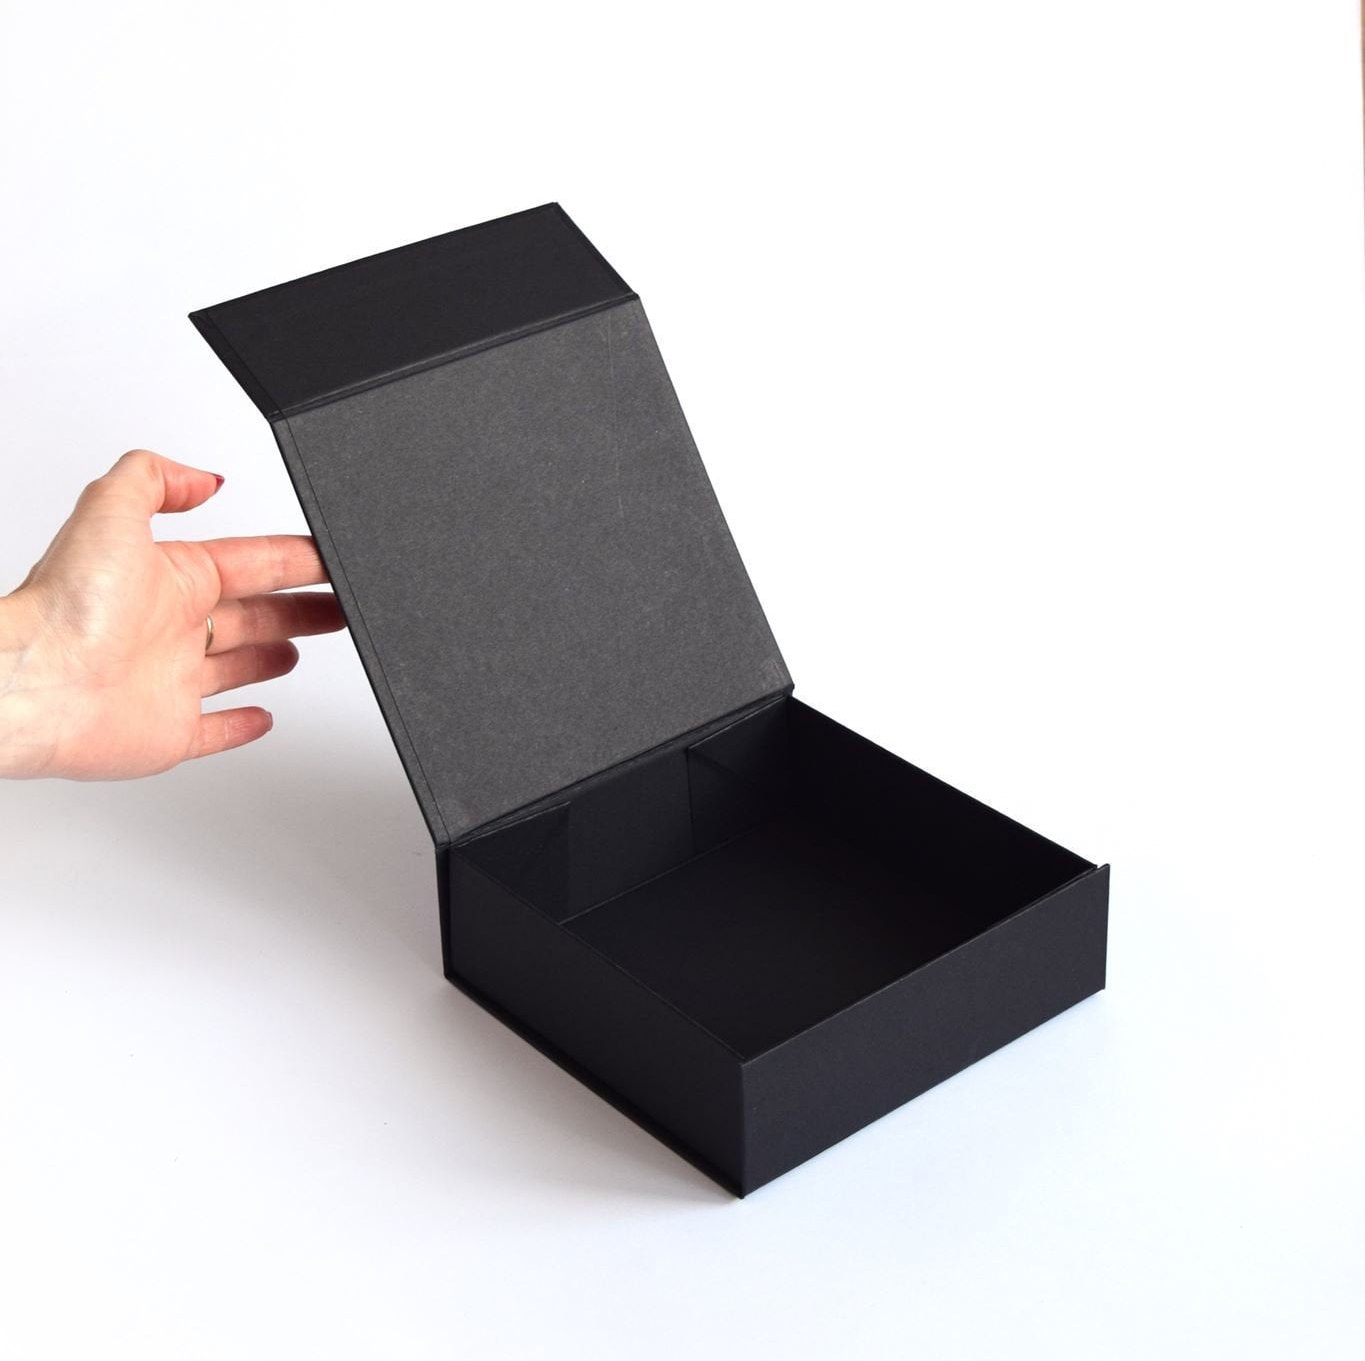 25x Matte Black Cardboard Box With Lid,a4 Large Cardboard Shipping